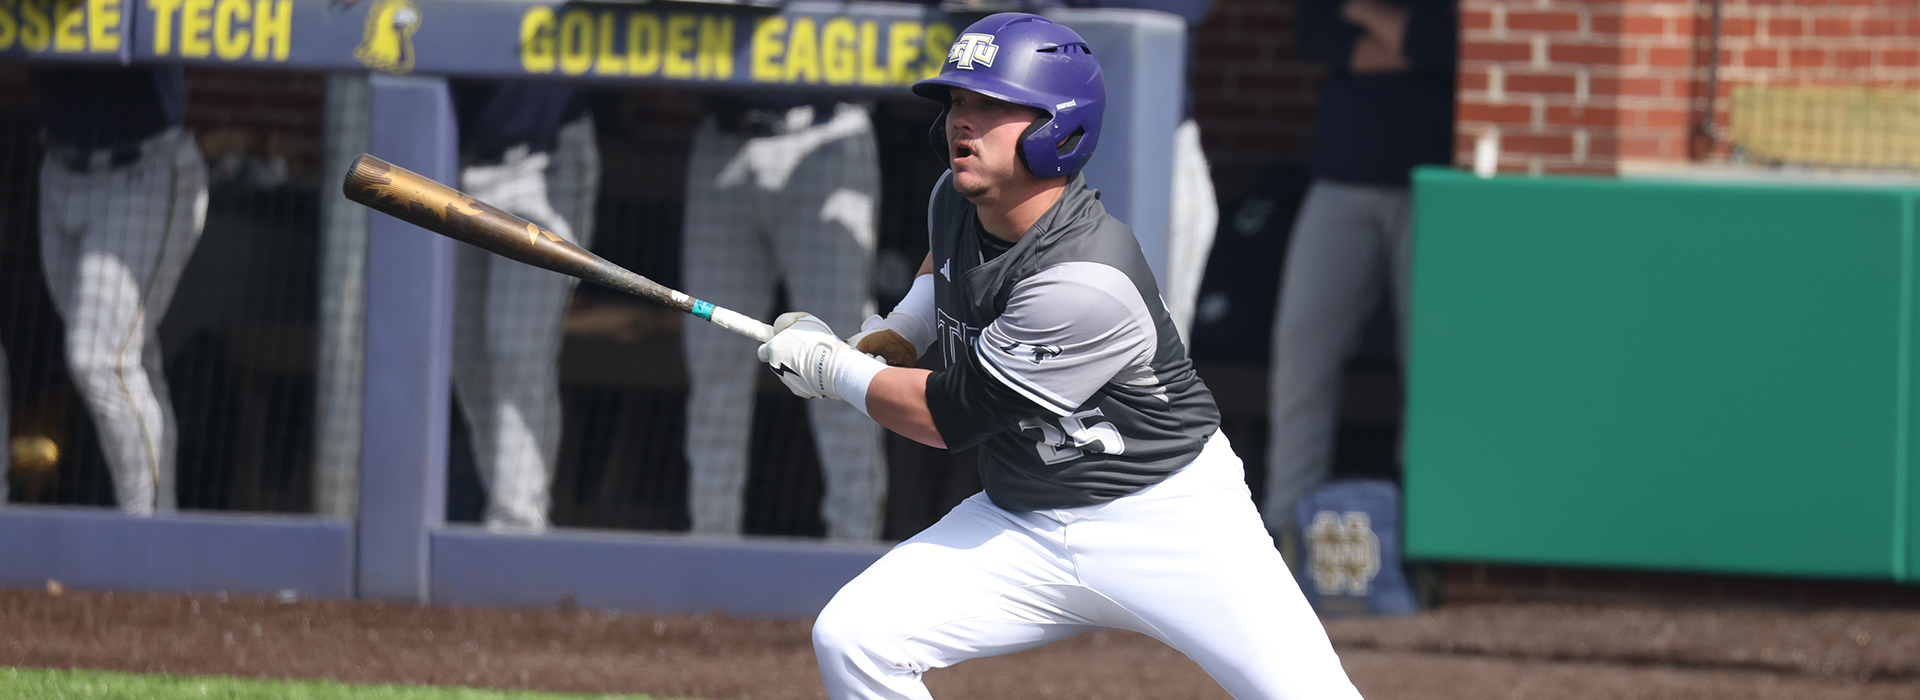 Notre Dame rallies back again to down Golden Eagles in series finale